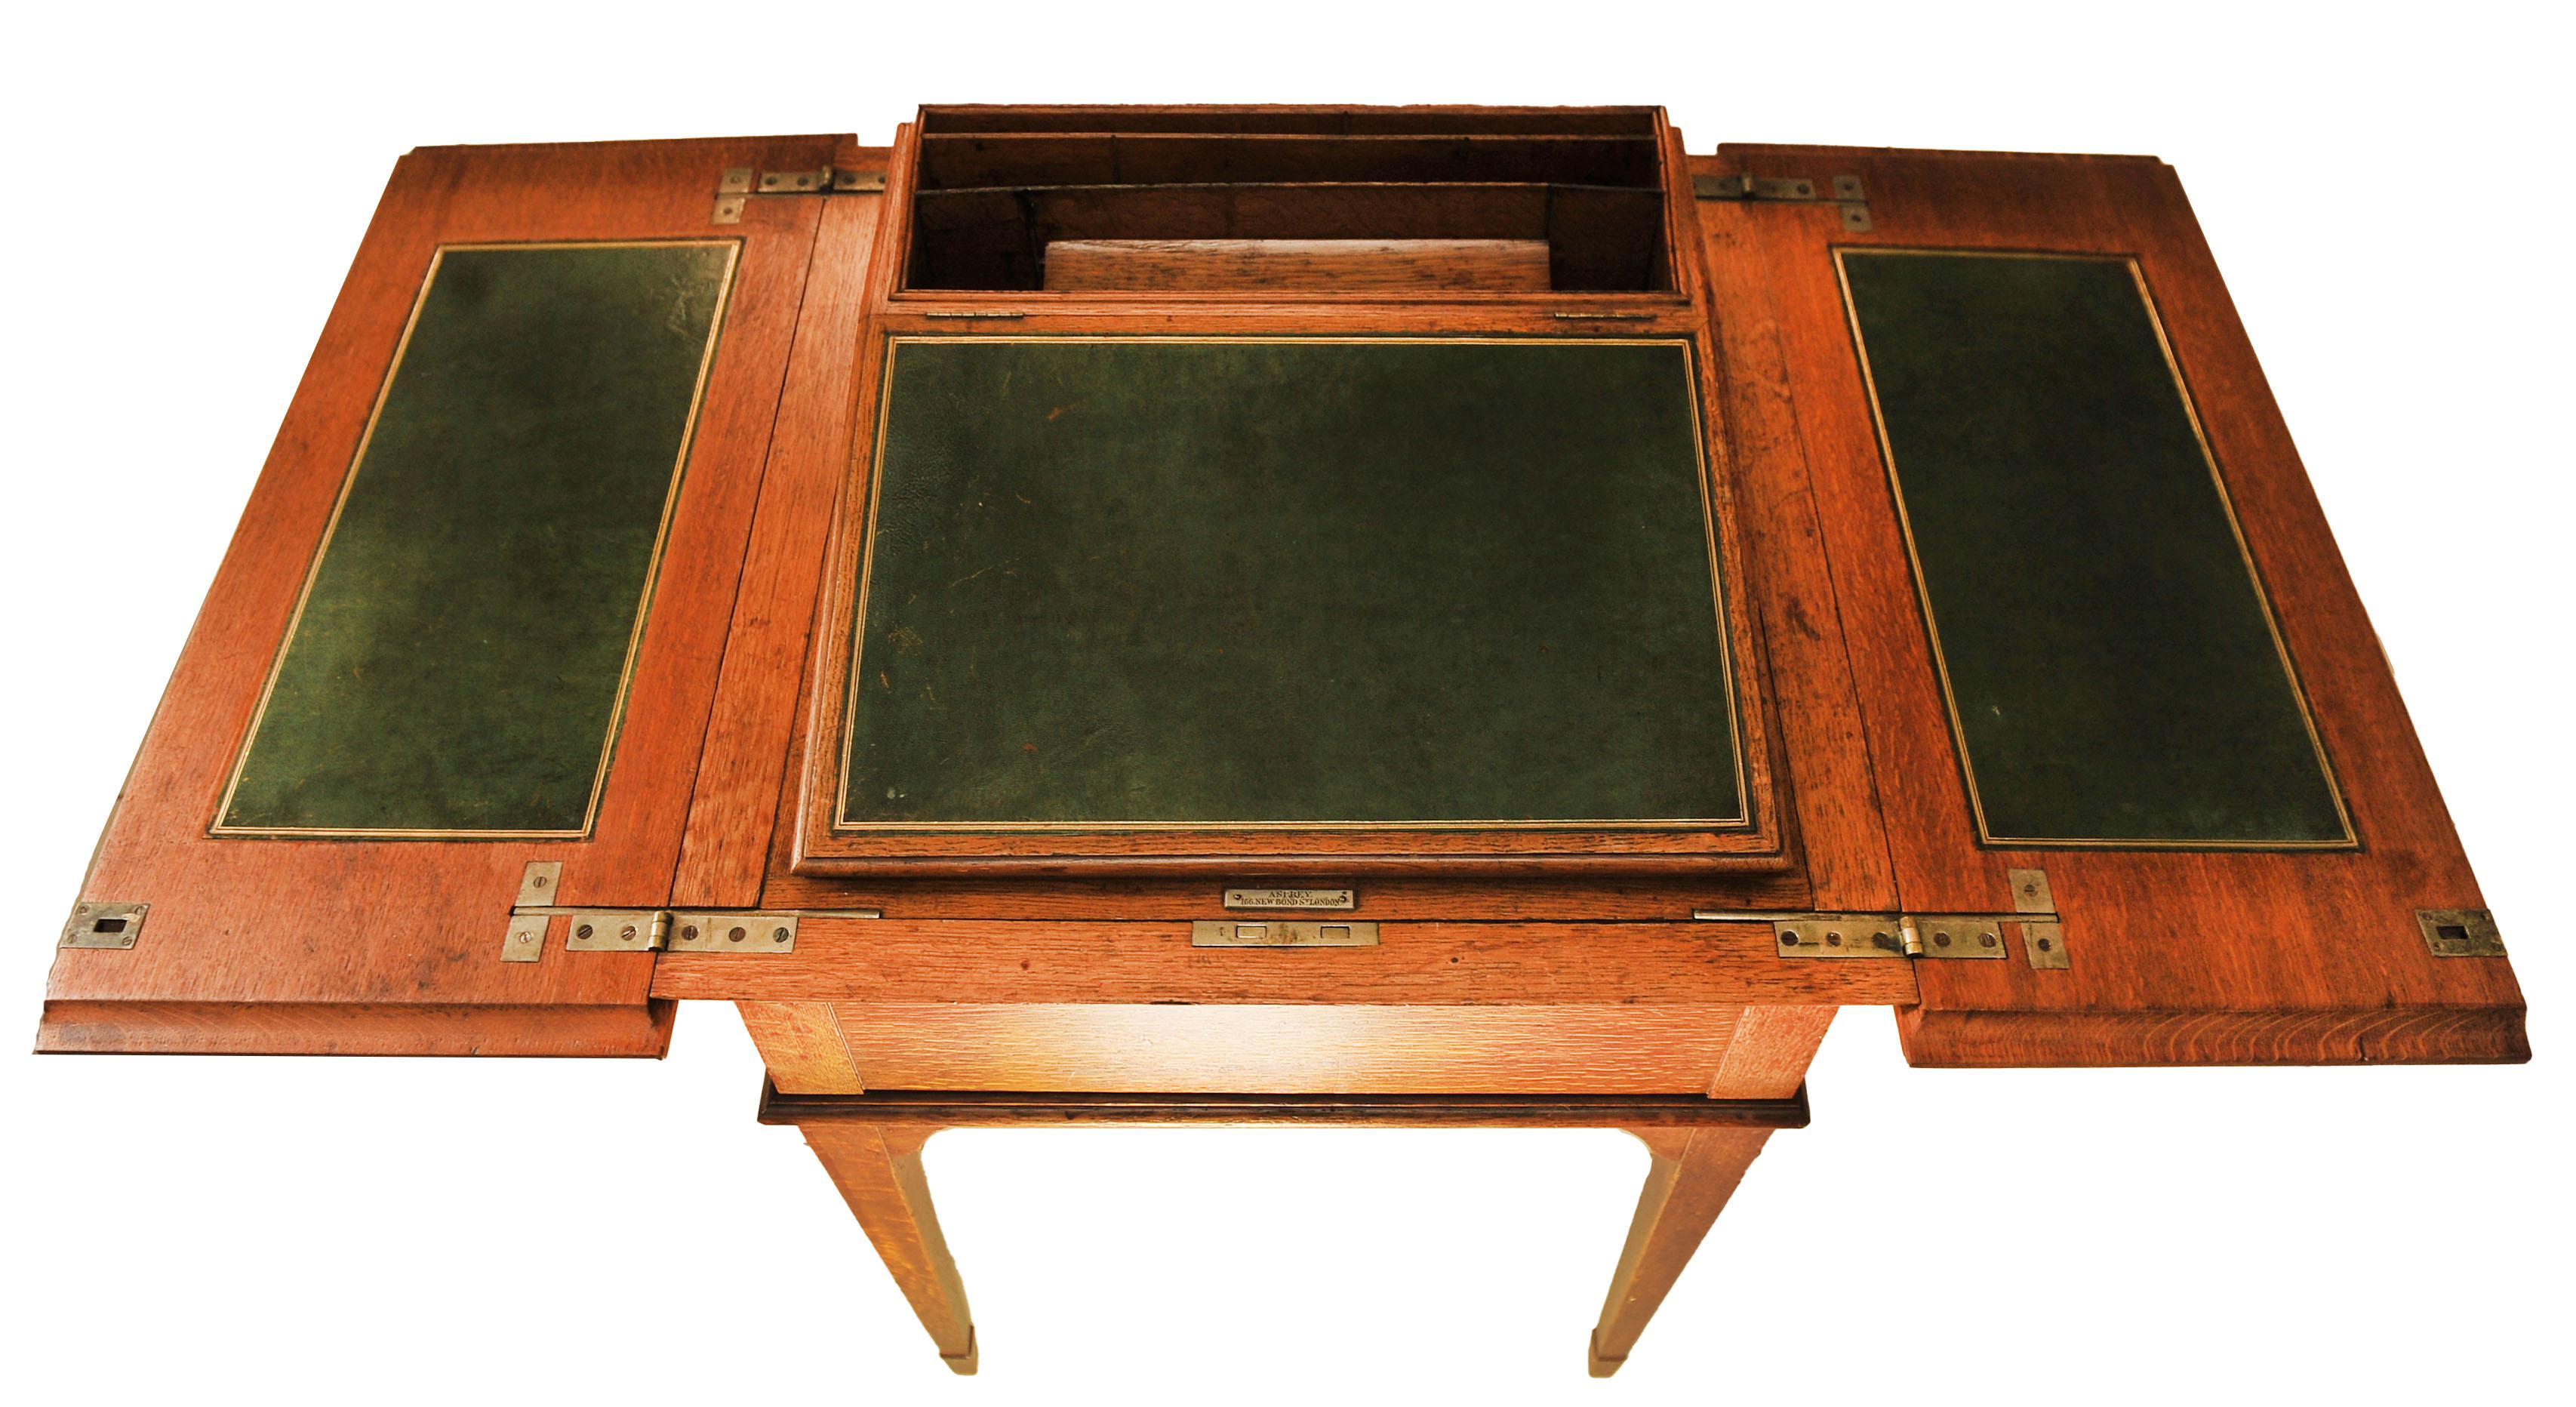 Asprey & Co. London Oak & Tooled Racing Green Leather Pop-Up Writing Desk 1920s For Sale 1